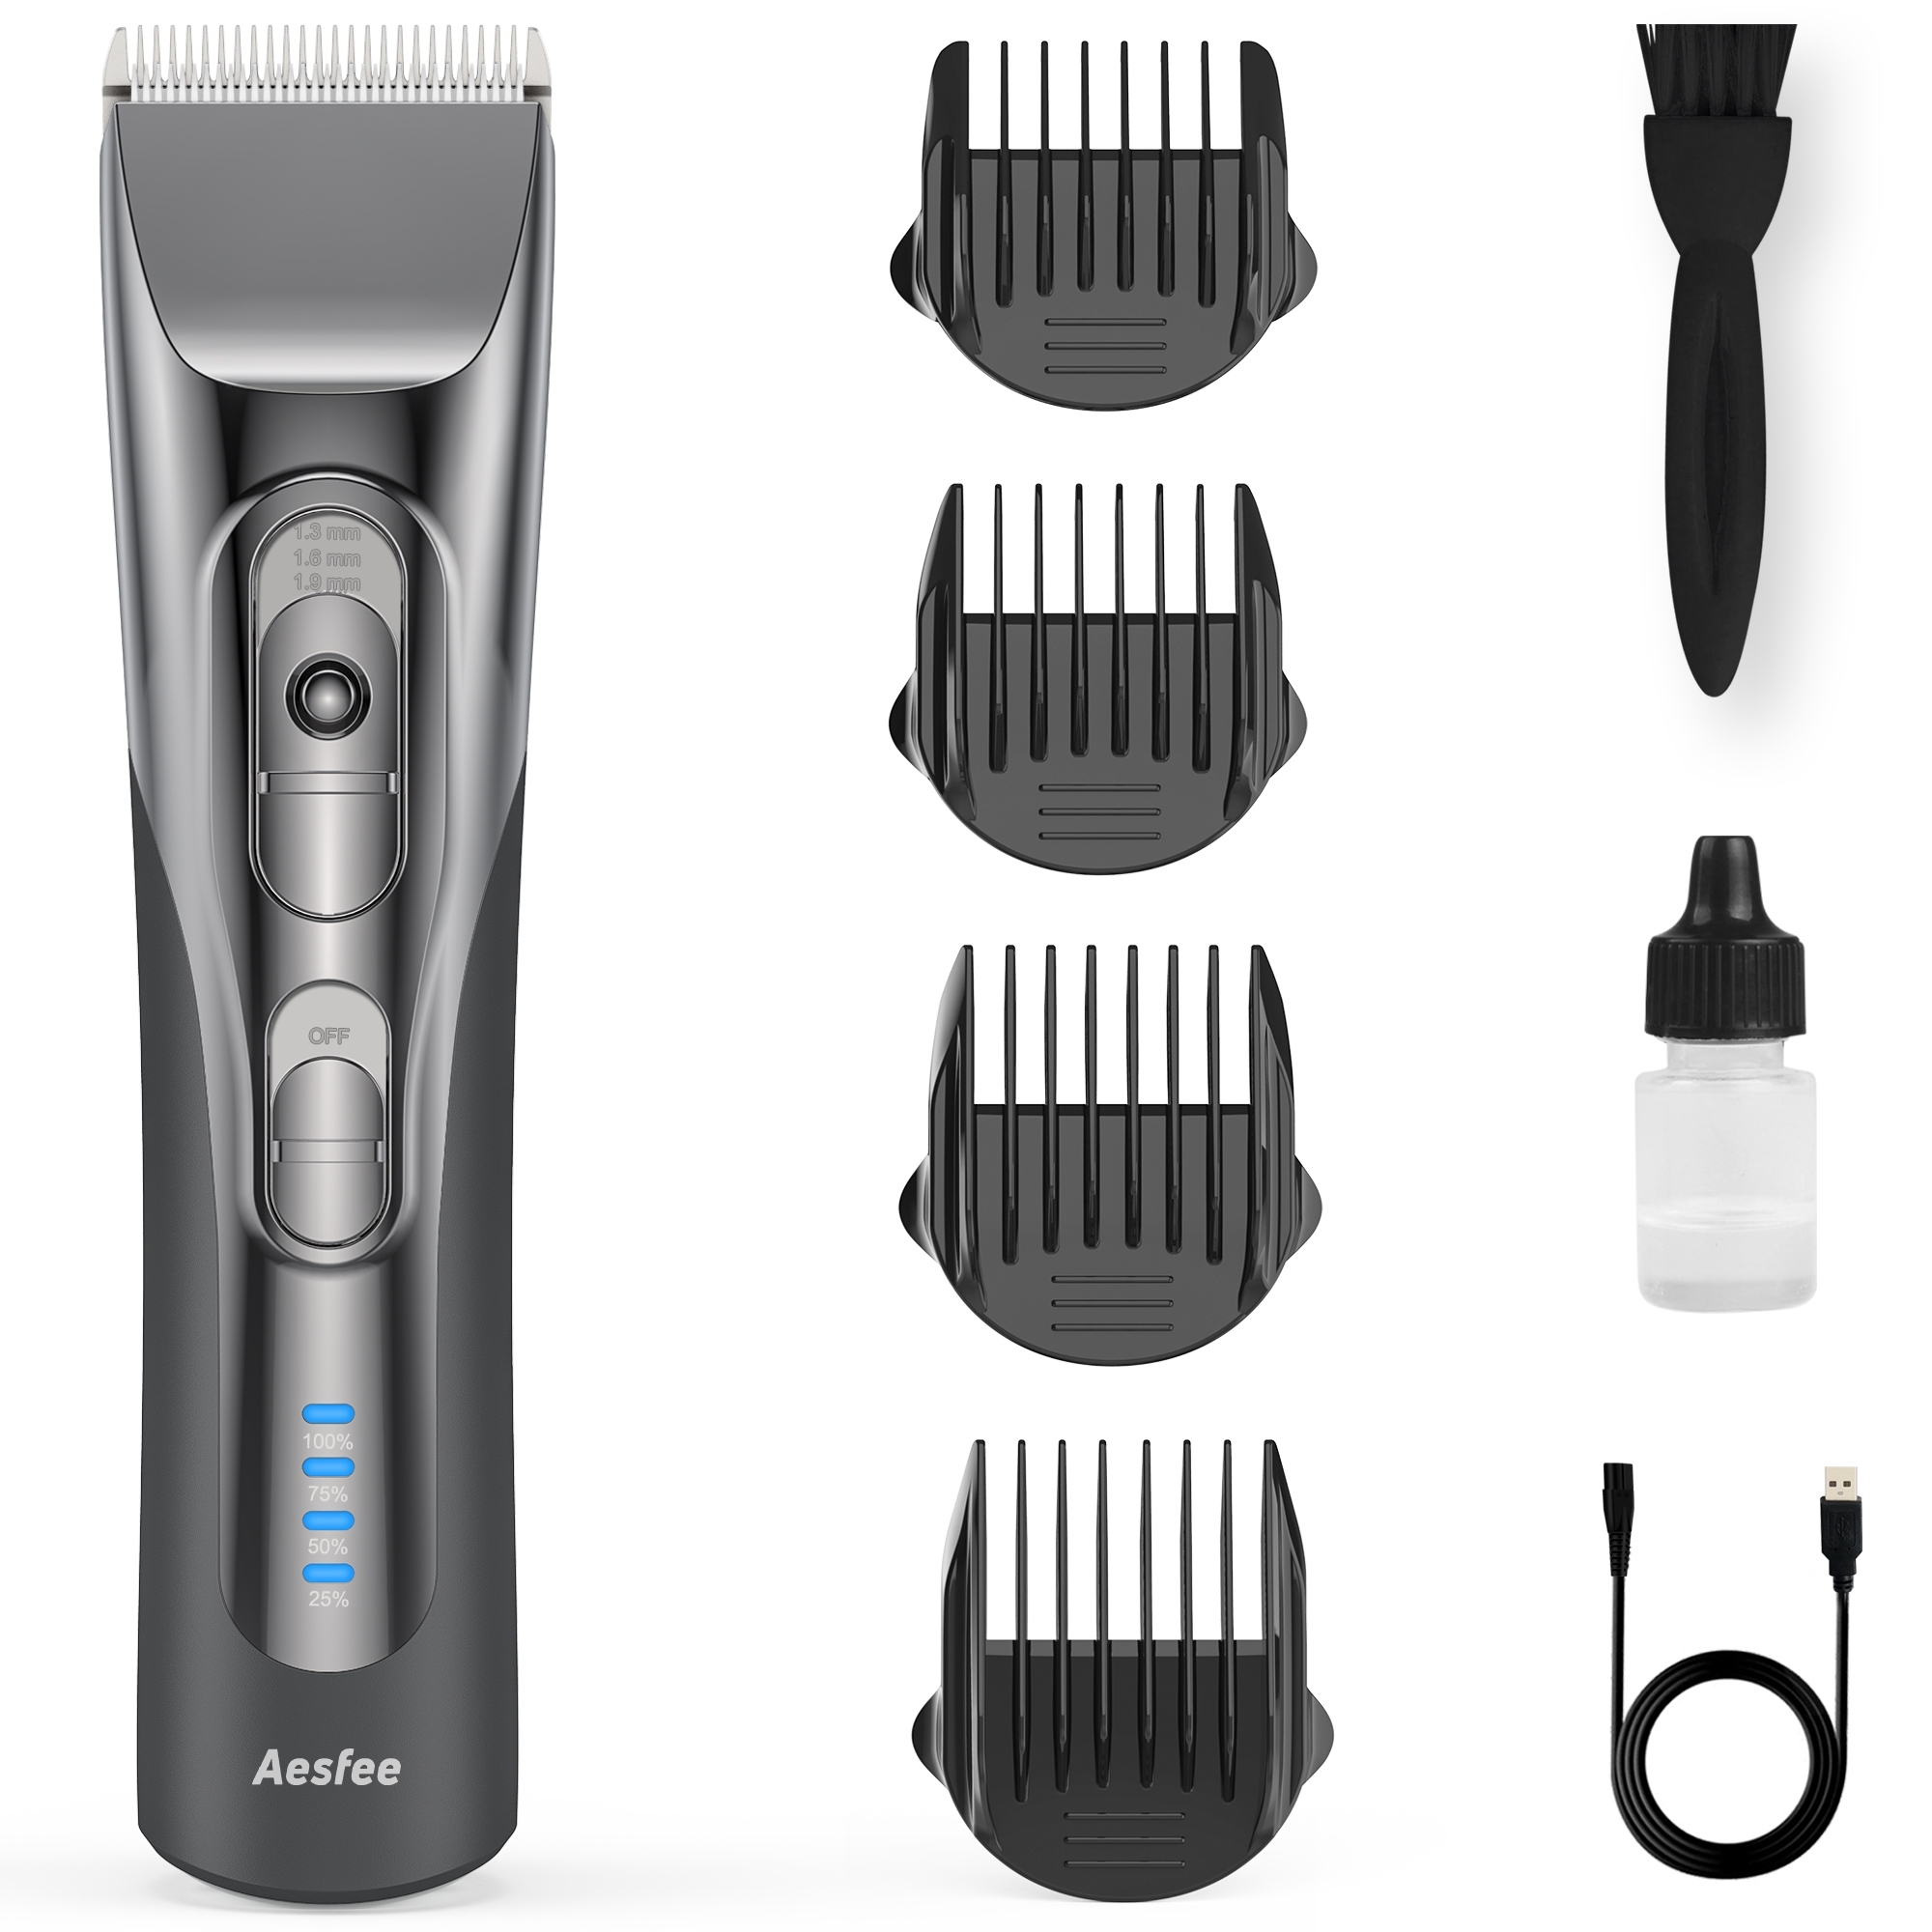 Professional Hair Clippers for Men Cordless Barber Clippers and Trimmer Set, Electric Hair Cutting Kit Powerful Barbers Haircut Trimmer Rechargeable with 4 Guide Combs, 2-Speed, Battery Indicator